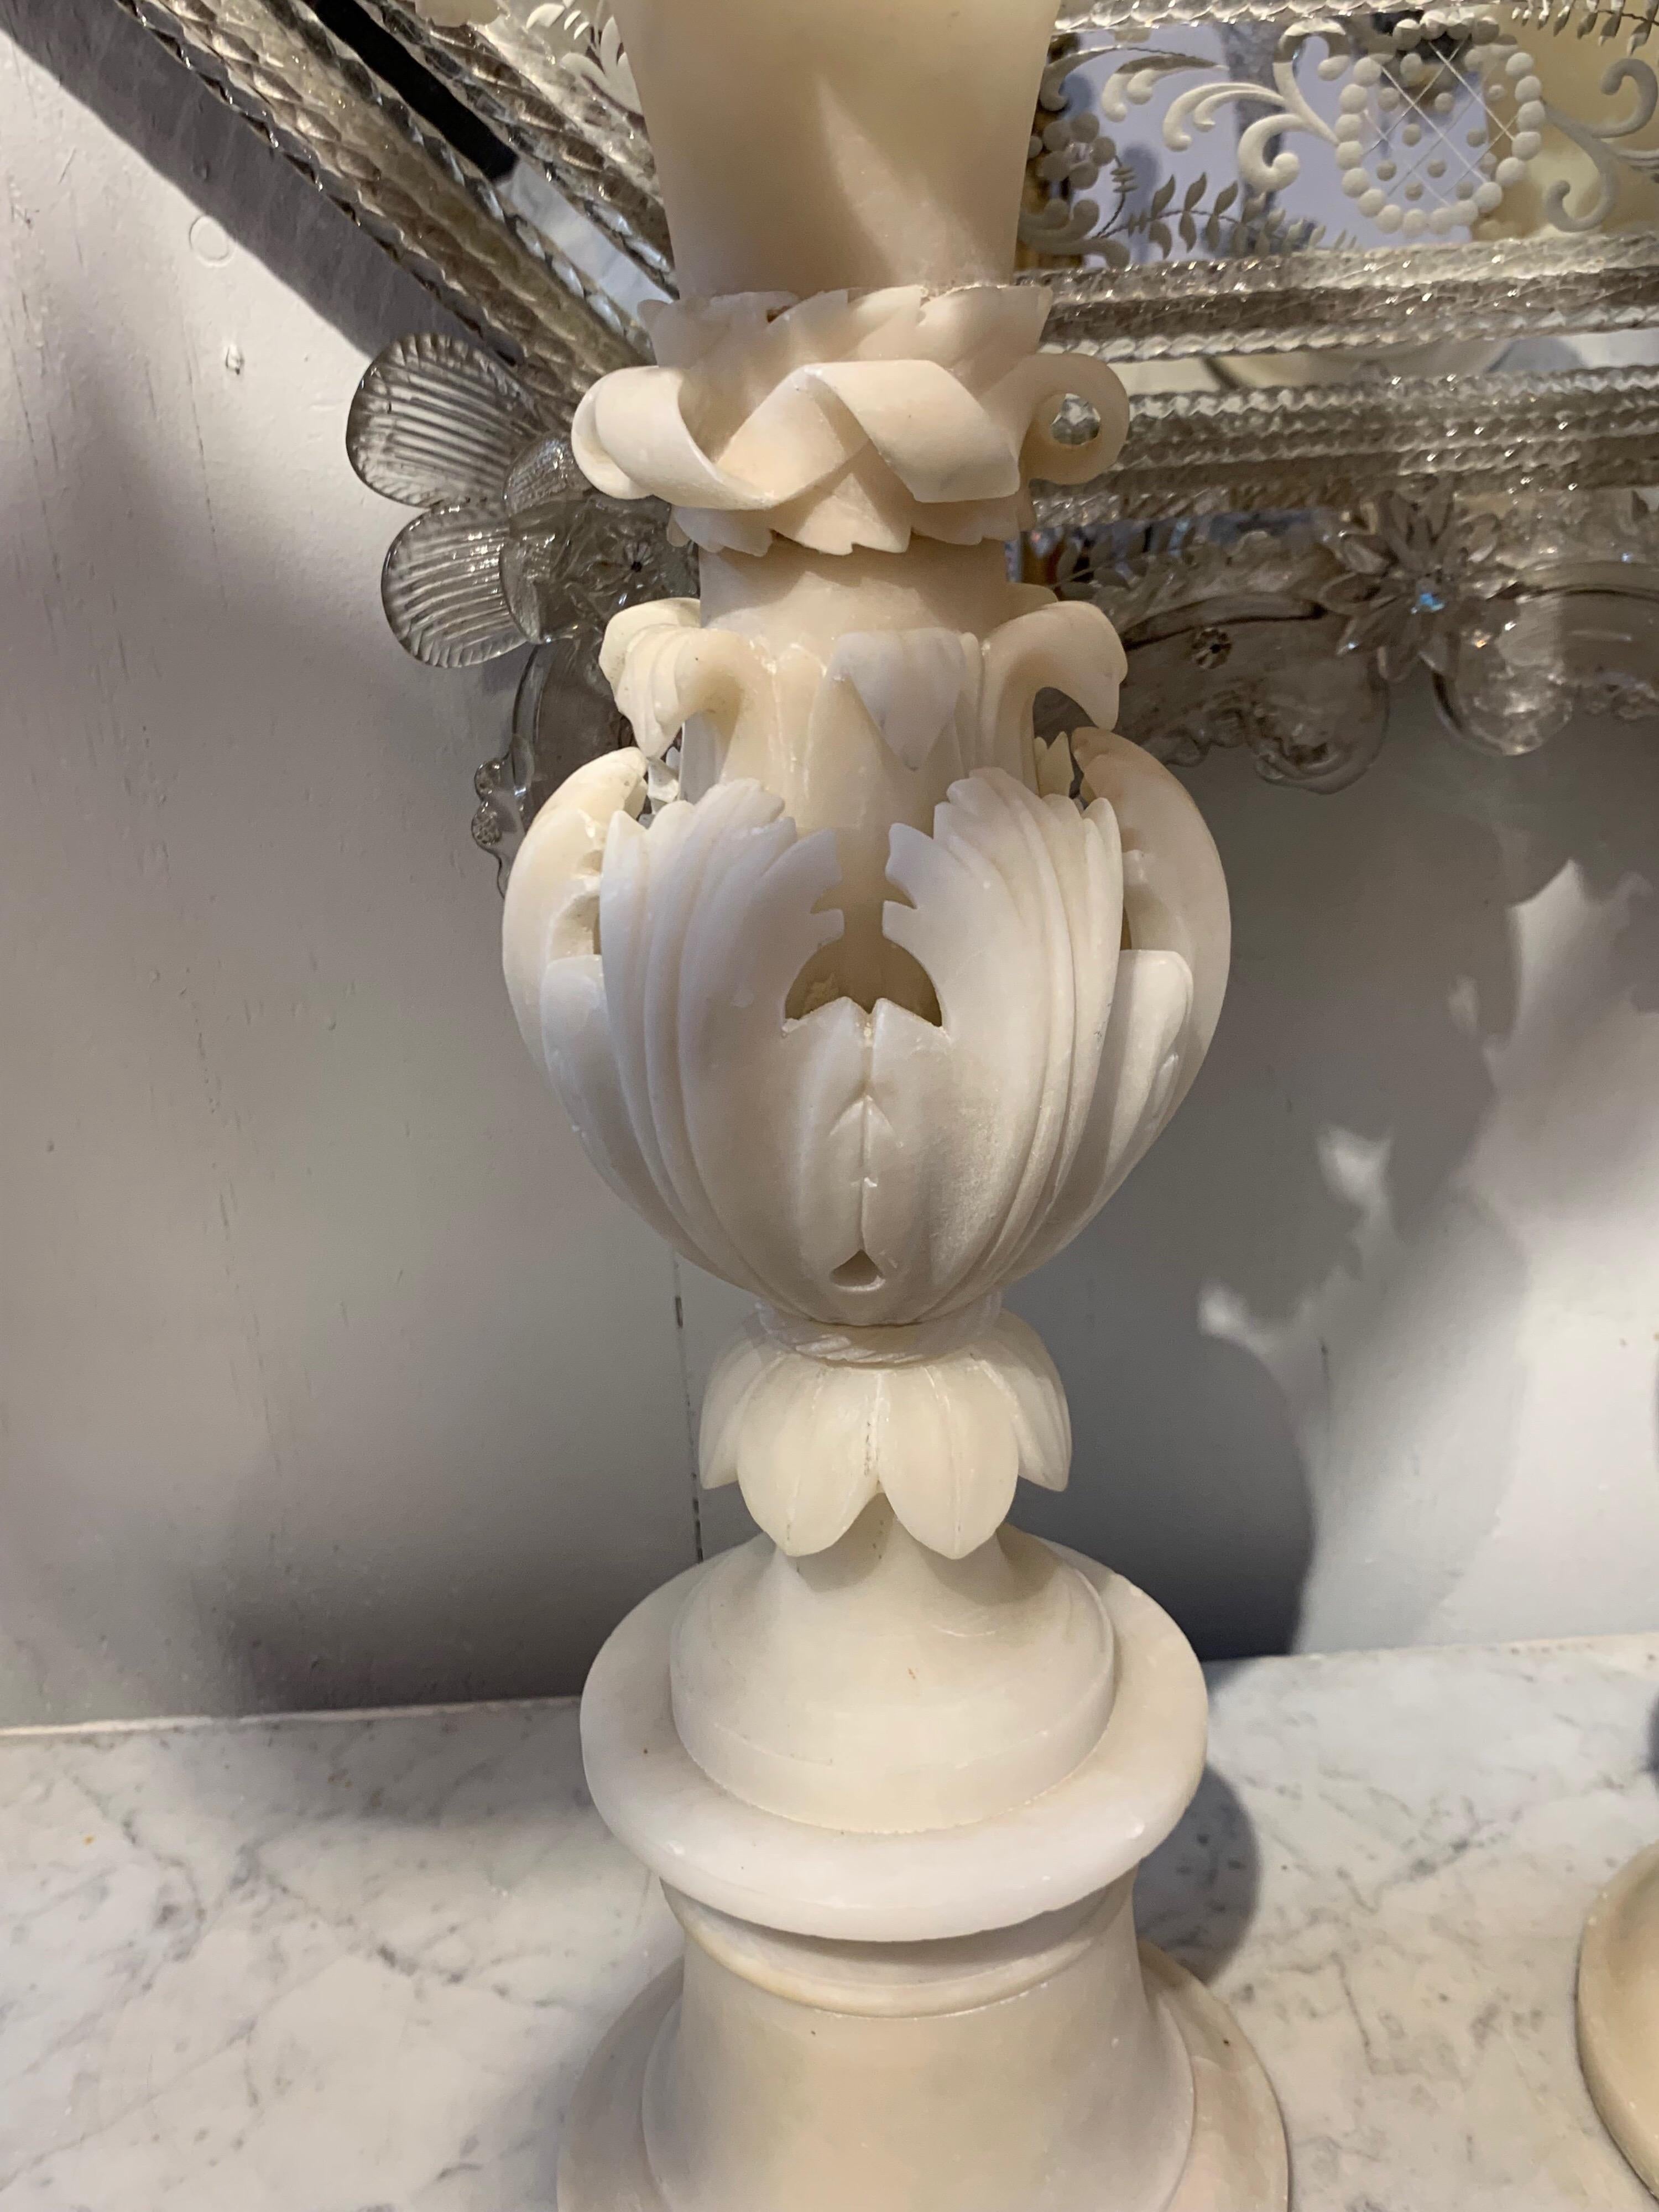 Exquisite pair of French Art Nouveau Alabaster vases. Very nice scale and shape on these. A beautiful accessory for a fine home.